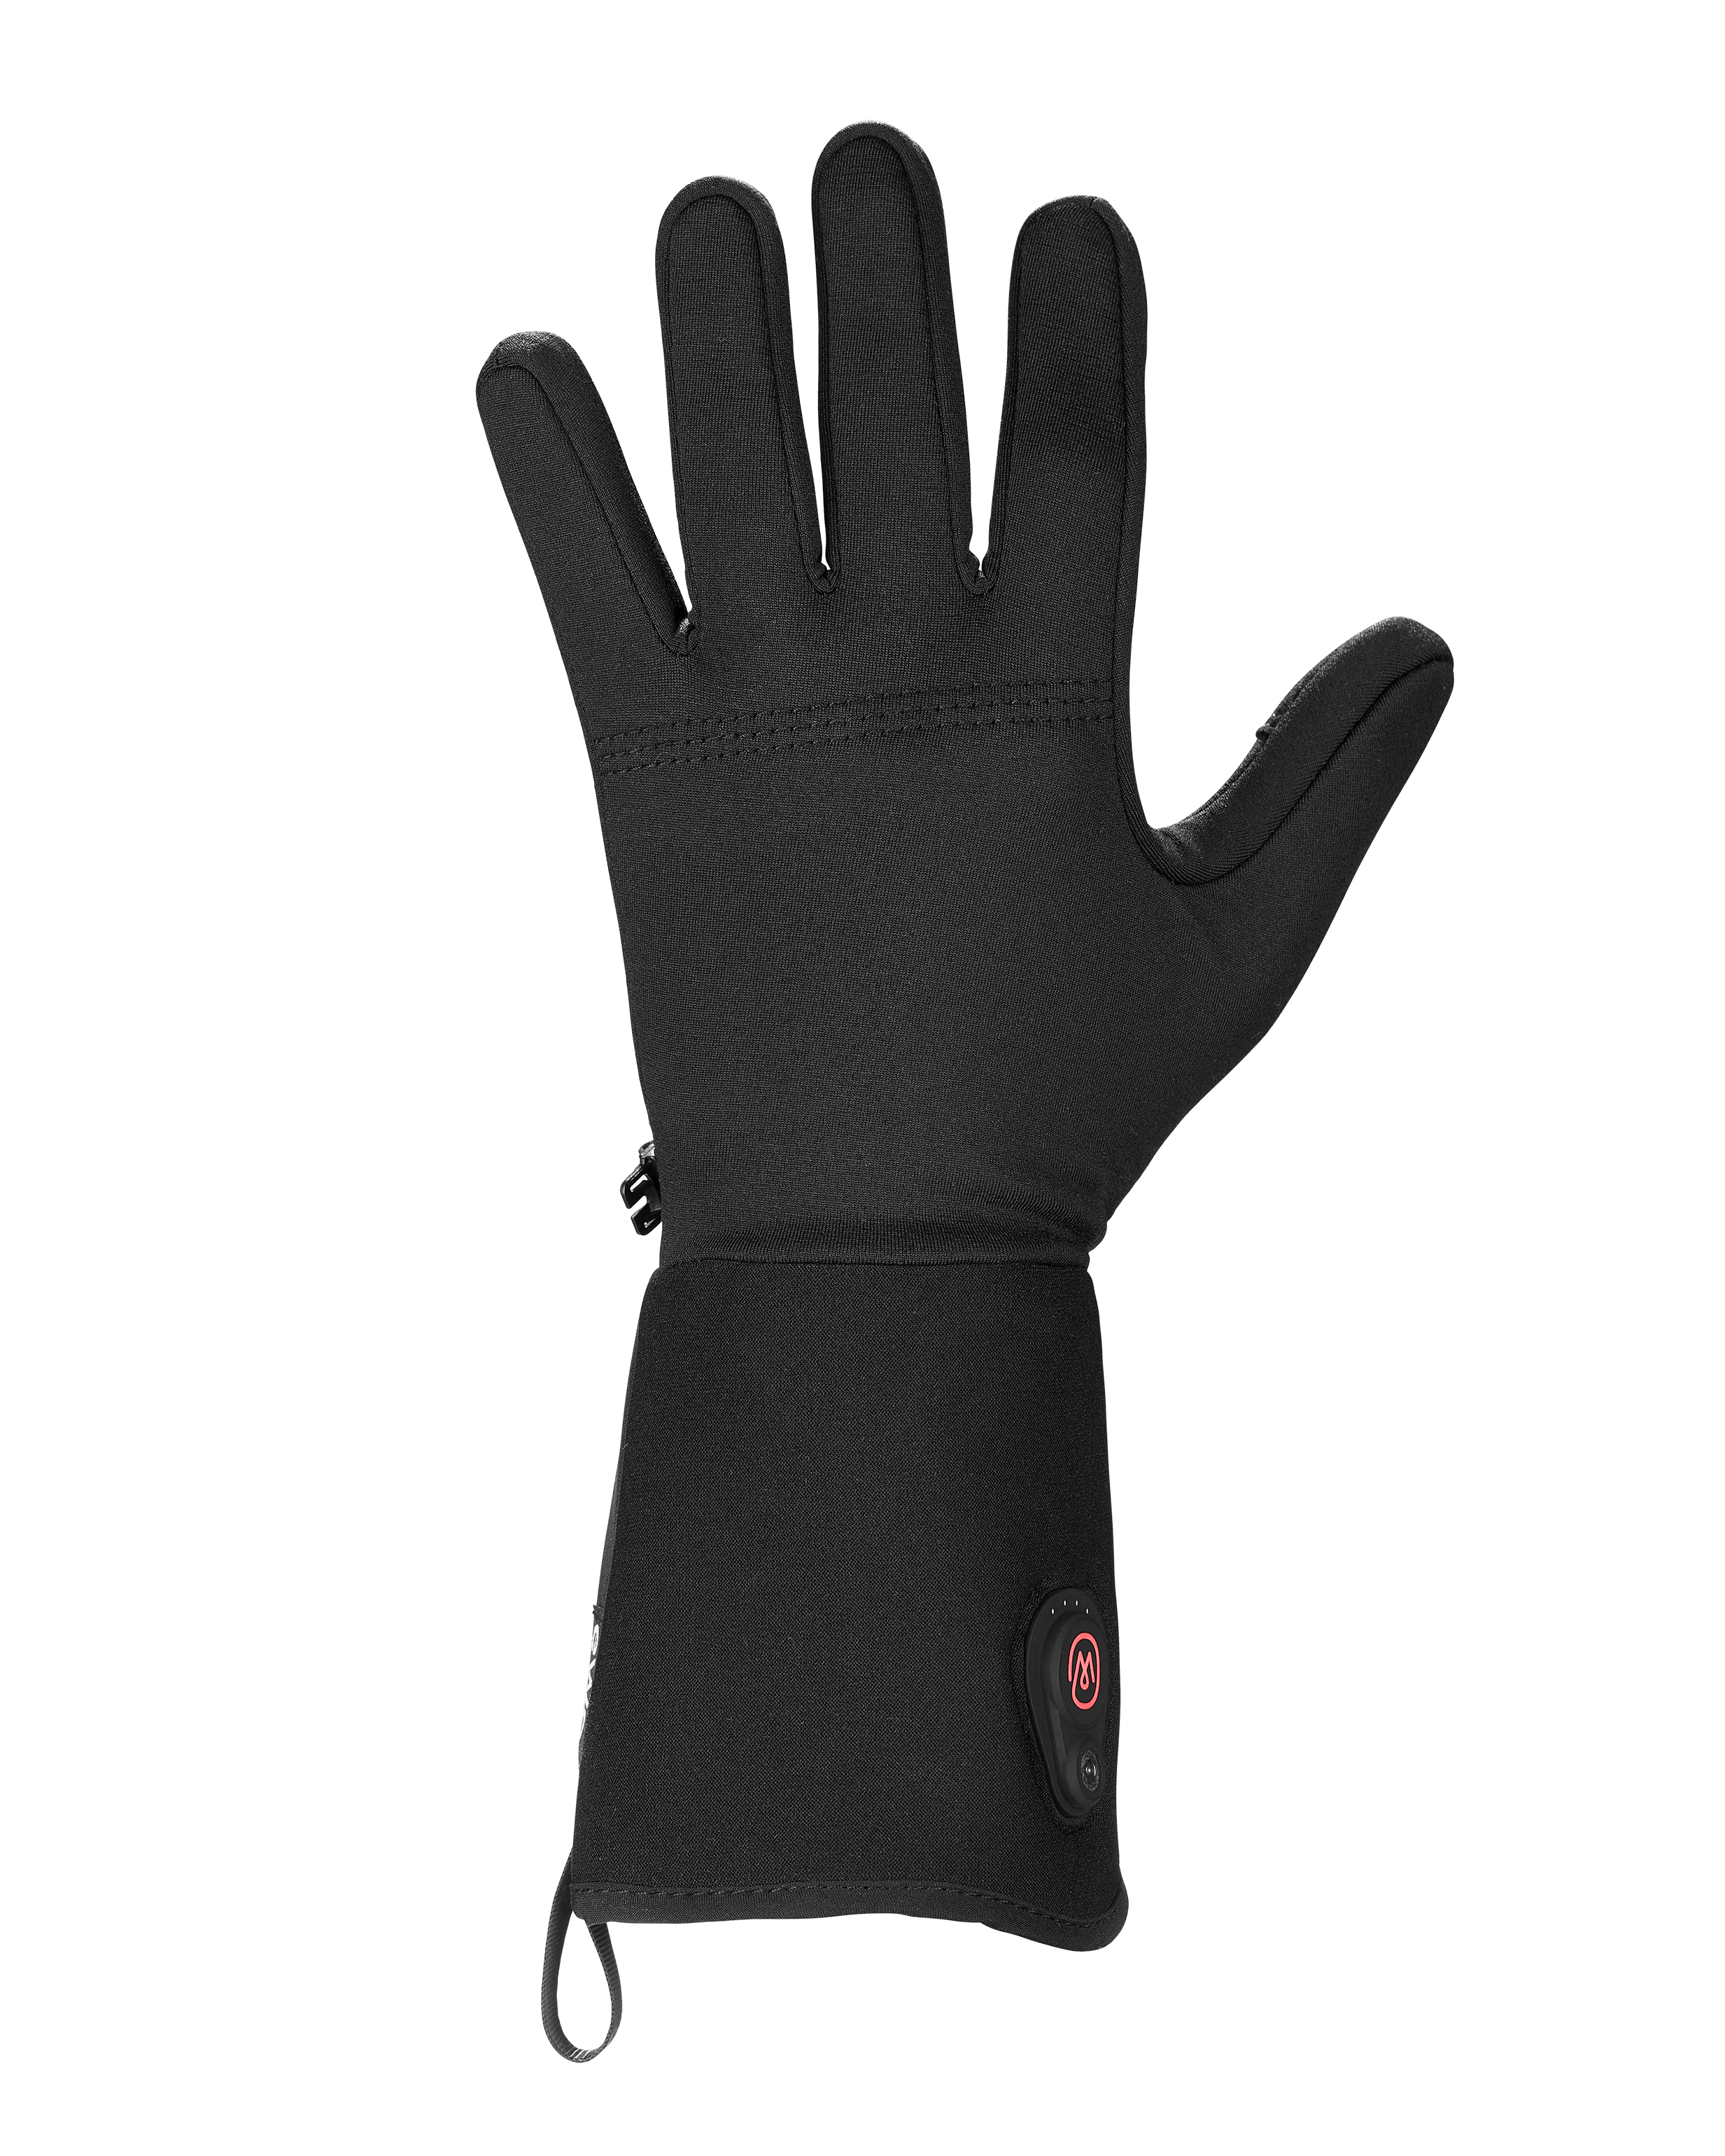 SnapConnect Heated Glove Liners